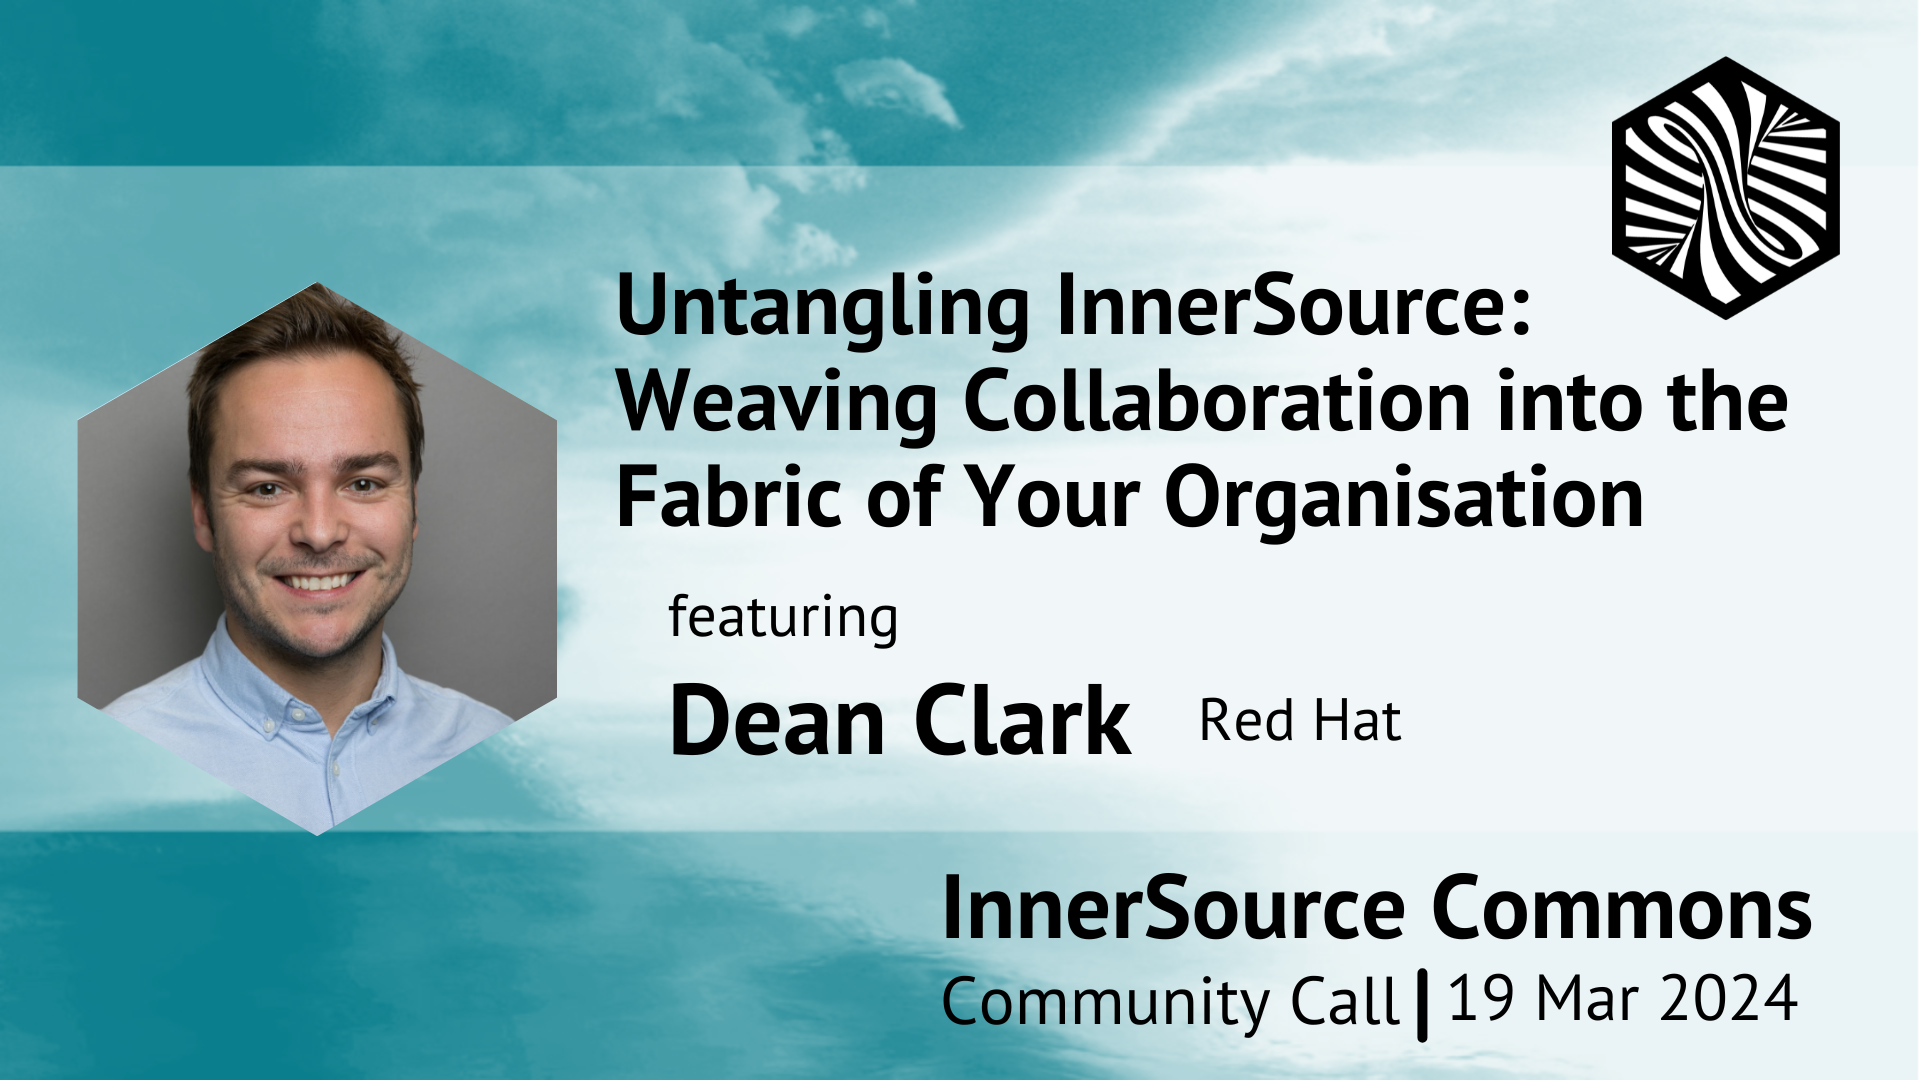 Untangling InnerSource - Weaving Collaboration into the Fabric of Your Organisation